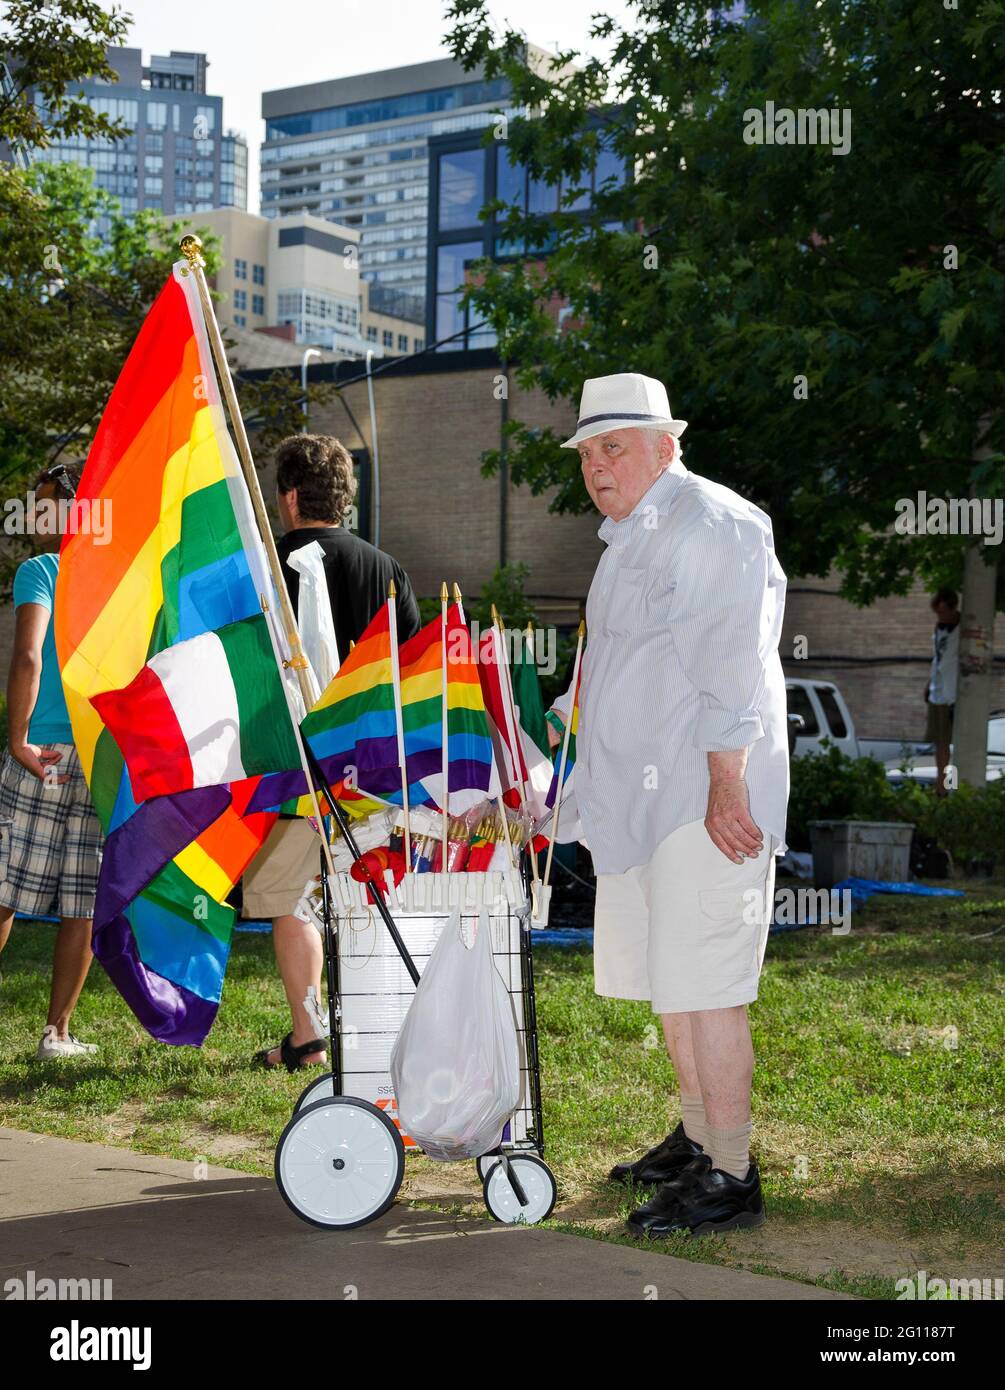 Old man selling rainbow flags at pride parade toronto, standing next to a garden path with a trolley wearing a white hat and dressed in light colors, Stock Photo